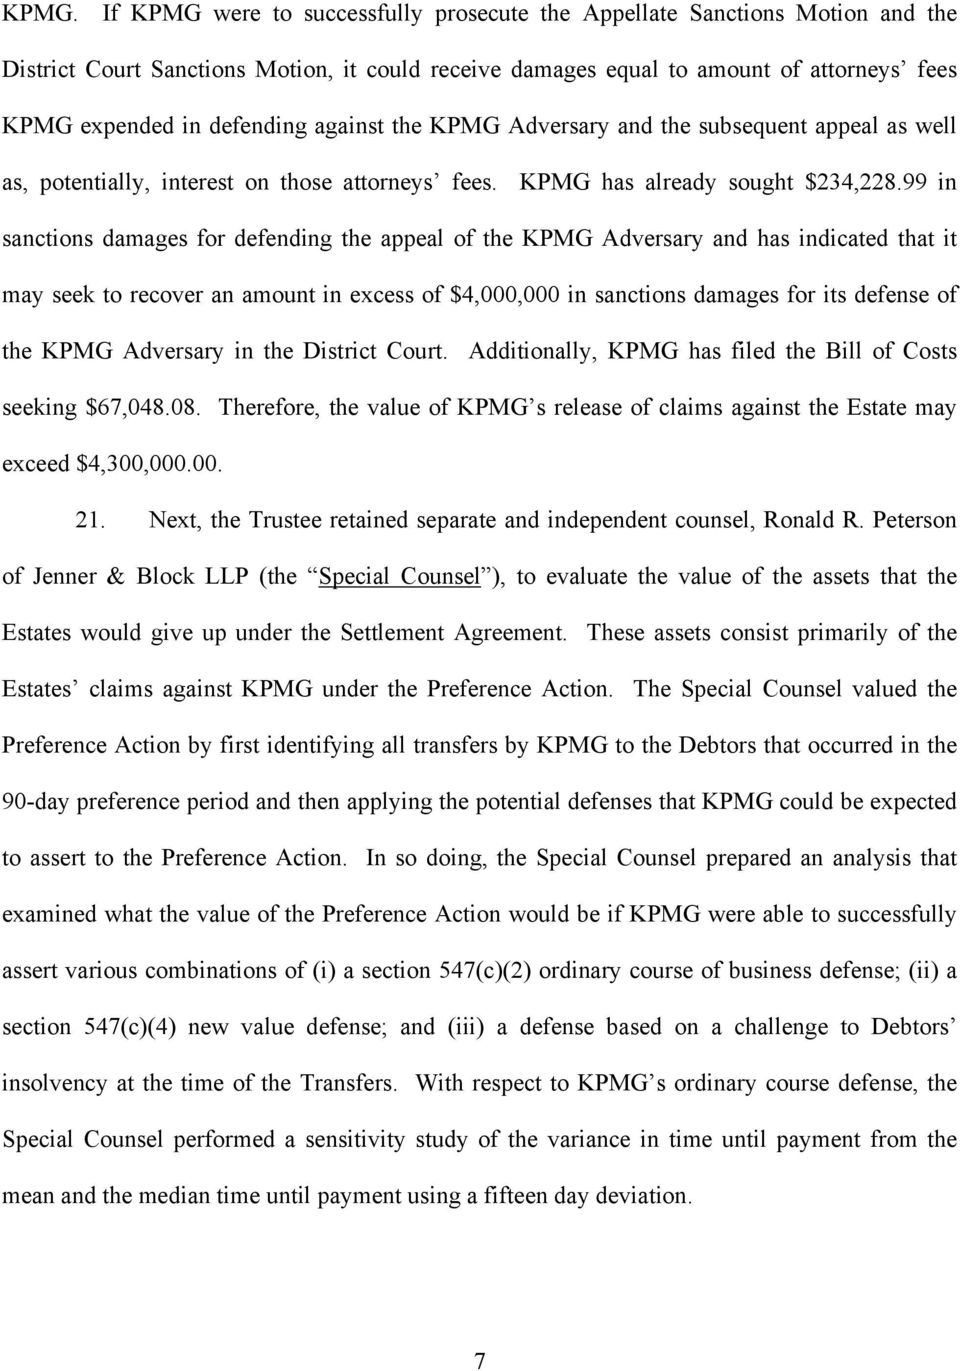 99 in sanctions damages for defending the appeal of the KPMG Adversary and has indicated that it may seek to recover an amount in excess of $4,000,000 in sanctions damages for its defense of the KPMG